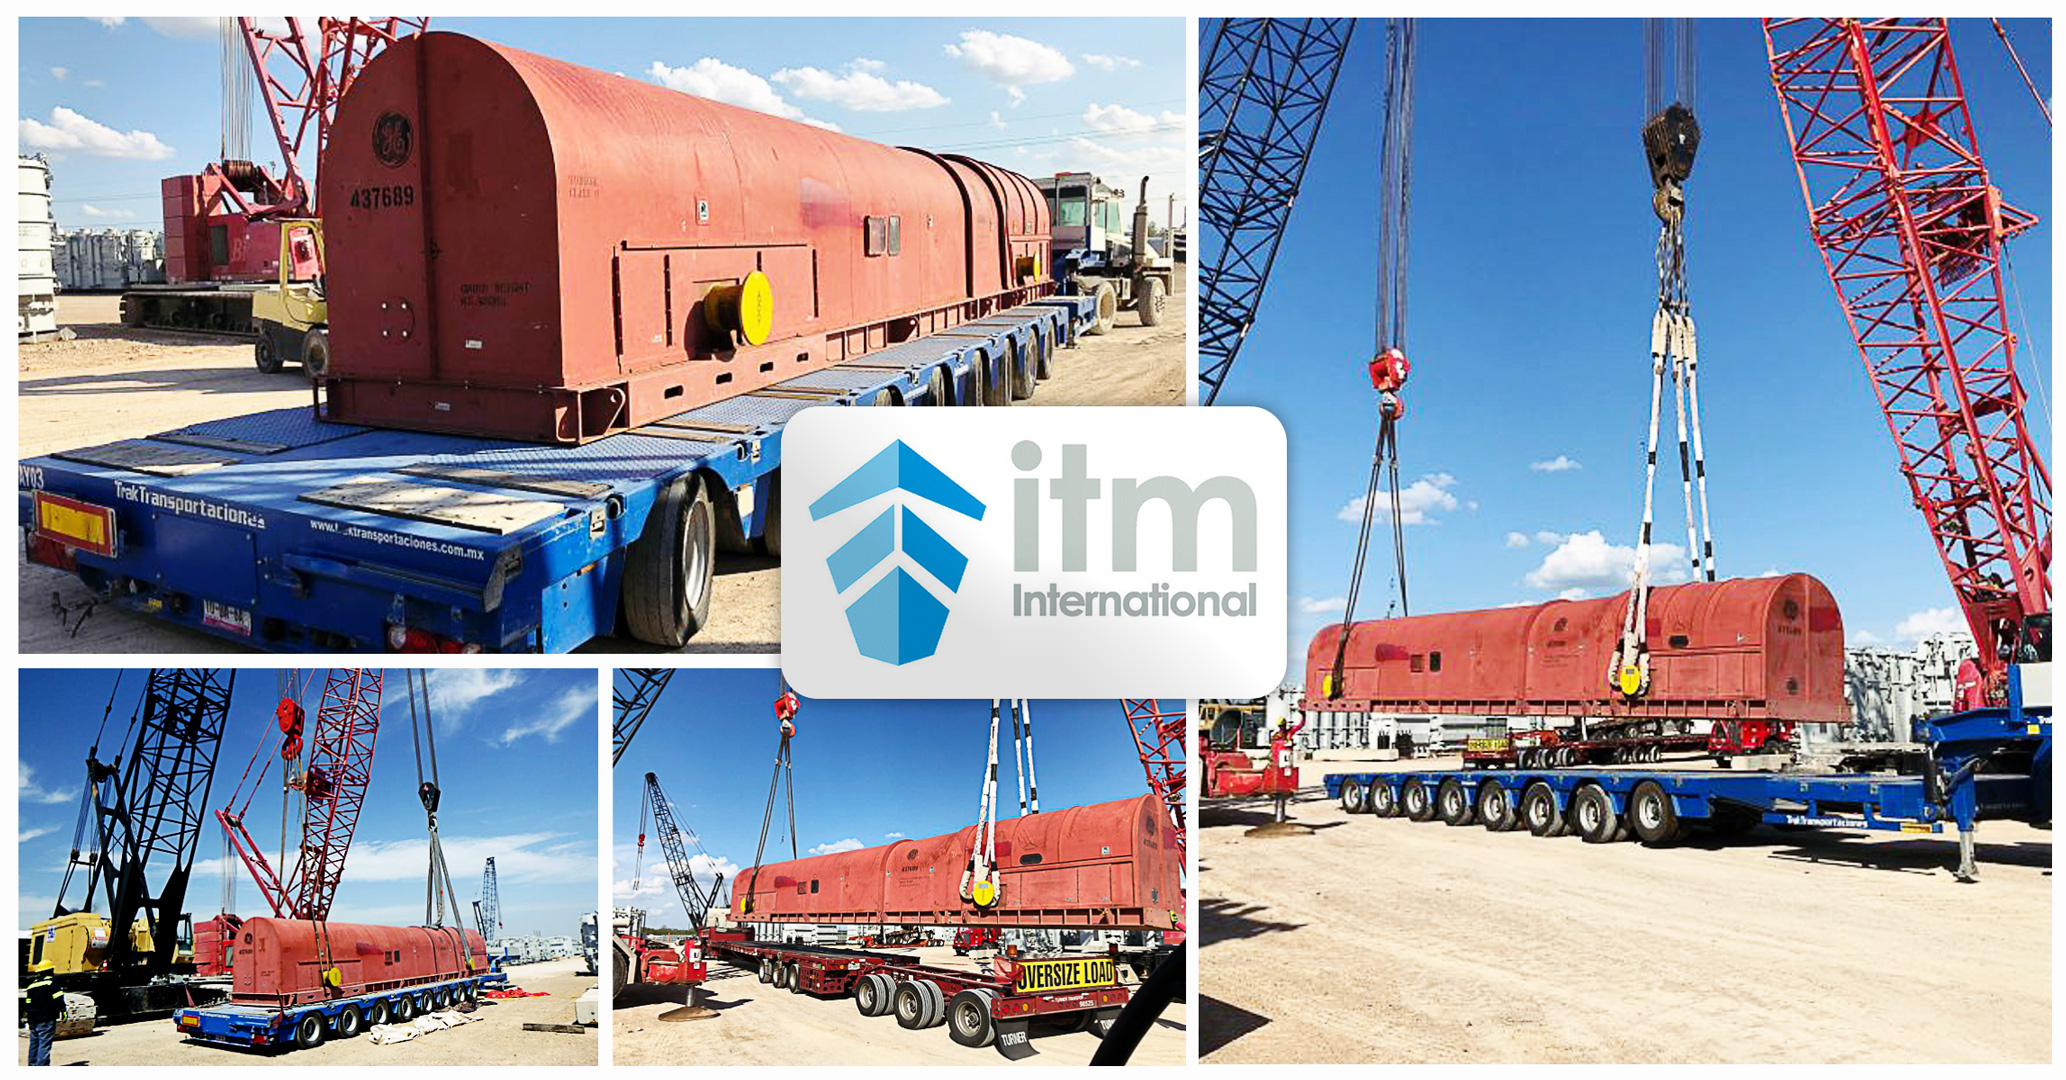 ITM Projects Recently Shipped a 157,000lbs Rotor for a Gas Turbine from Gomez Palacio Durango, MX to Richmond, VA